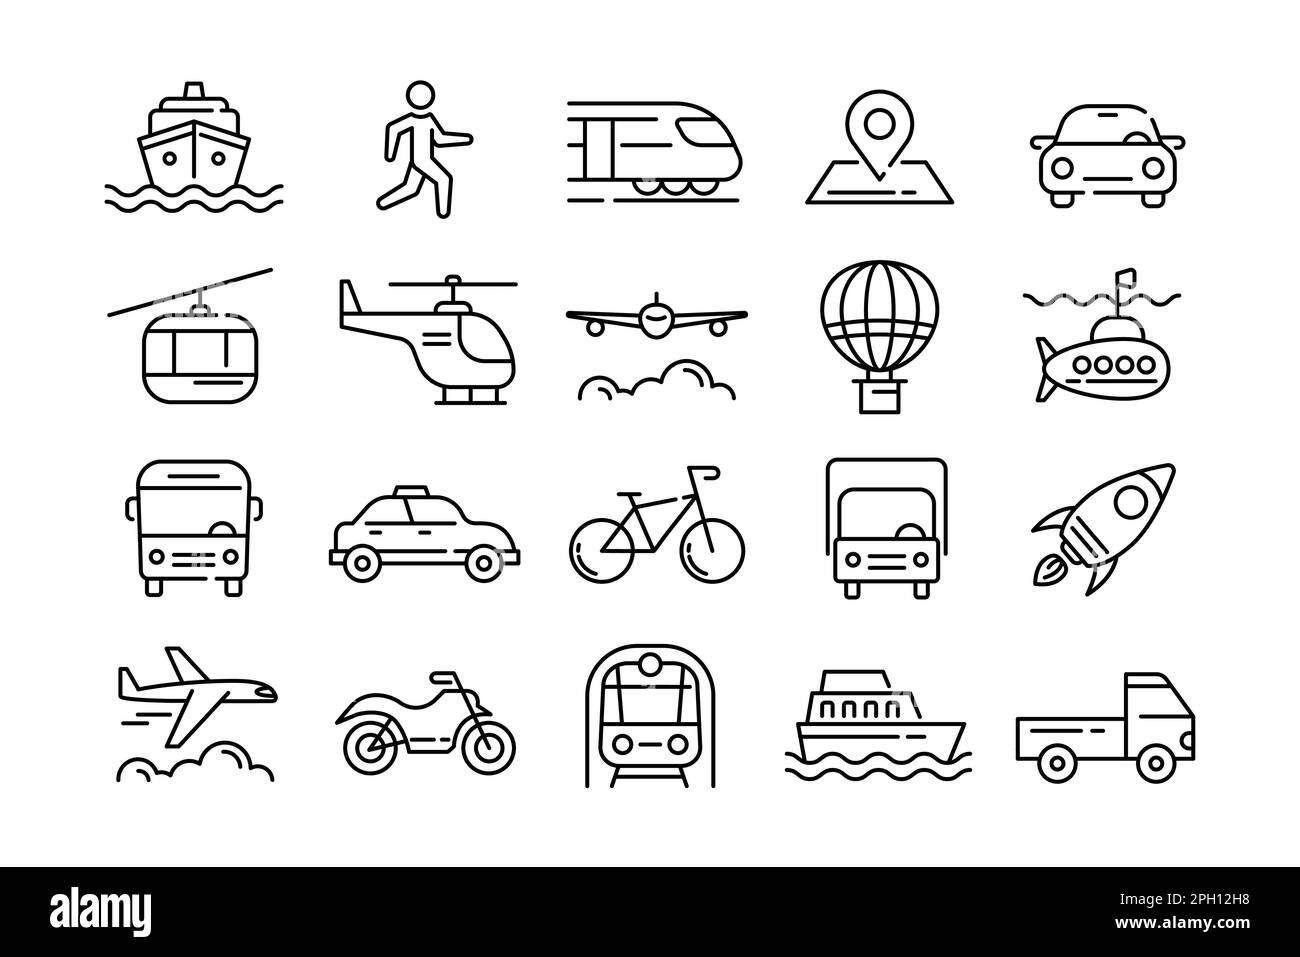 Transport line icons. Car travel. Vehicle types. Taxi and bike. Public bus. Bicycle and train body. Automobile truck or van. Sea boat. Helicopter and motorcycle traffic. Vector outline pictograms set Stock Vector